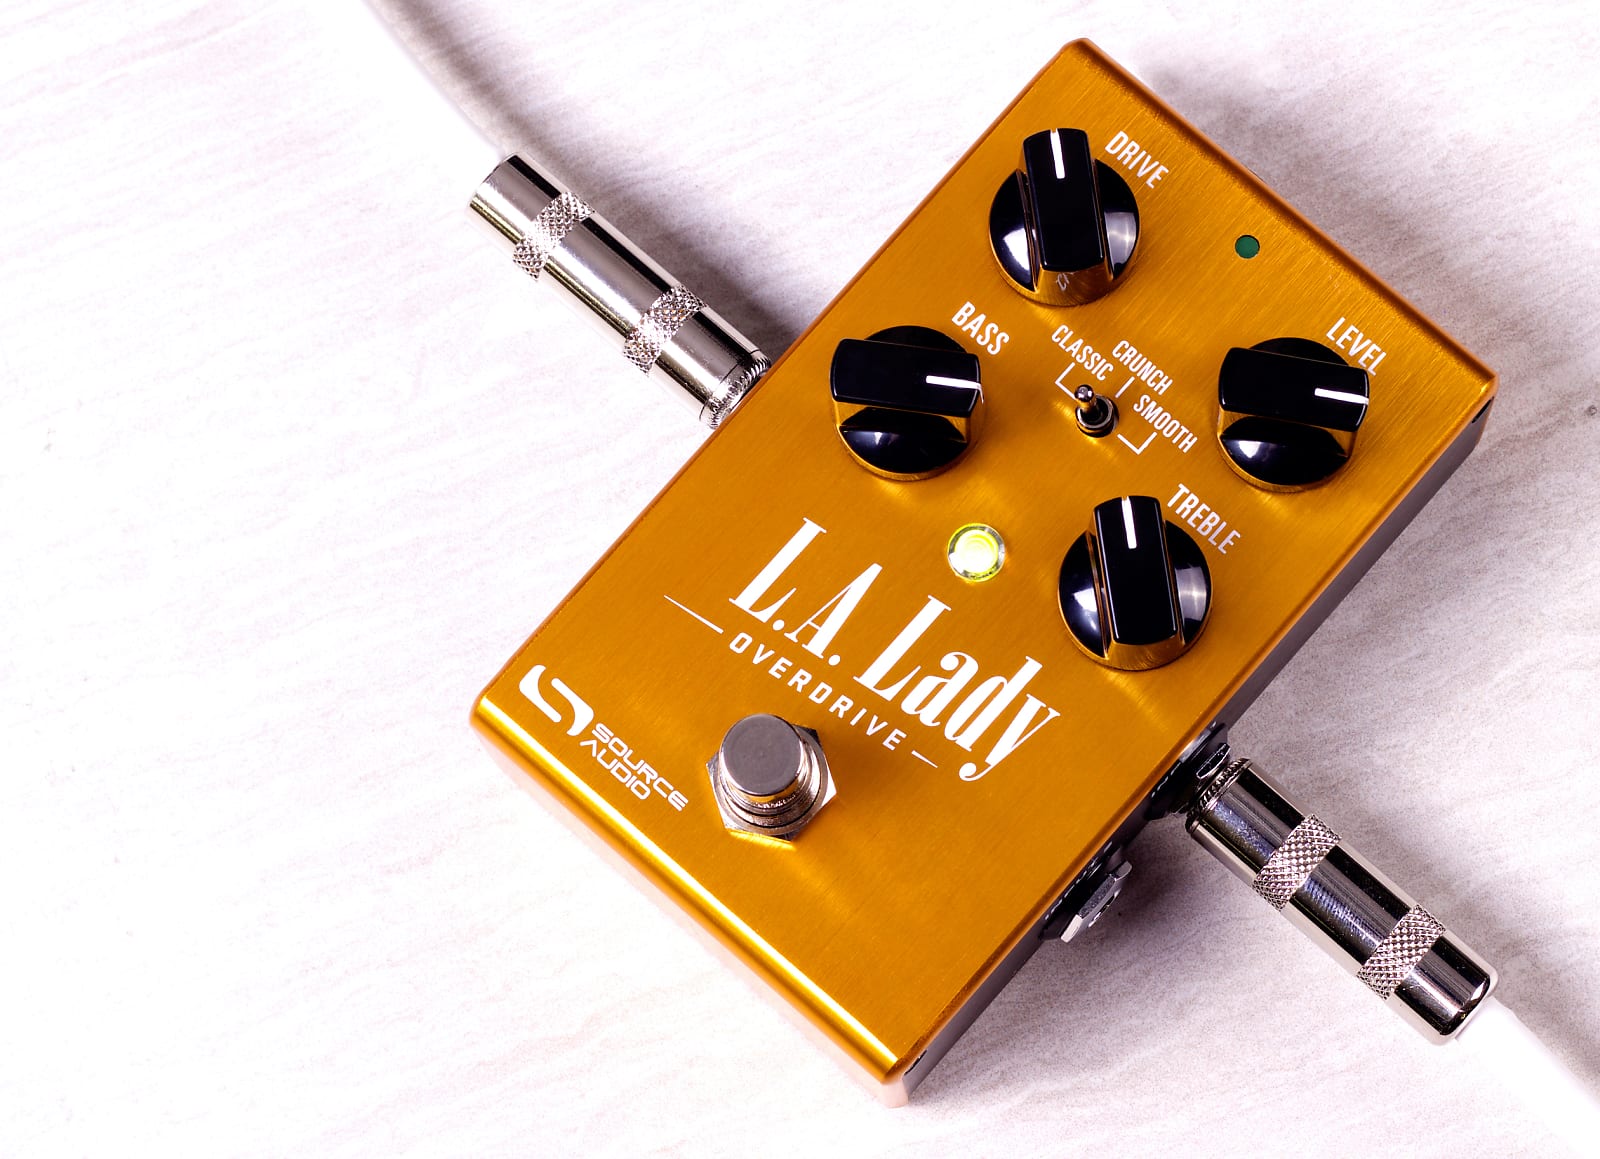 Source Audio SA244 One Series L.A. Lady Overdrive Effects Pedal